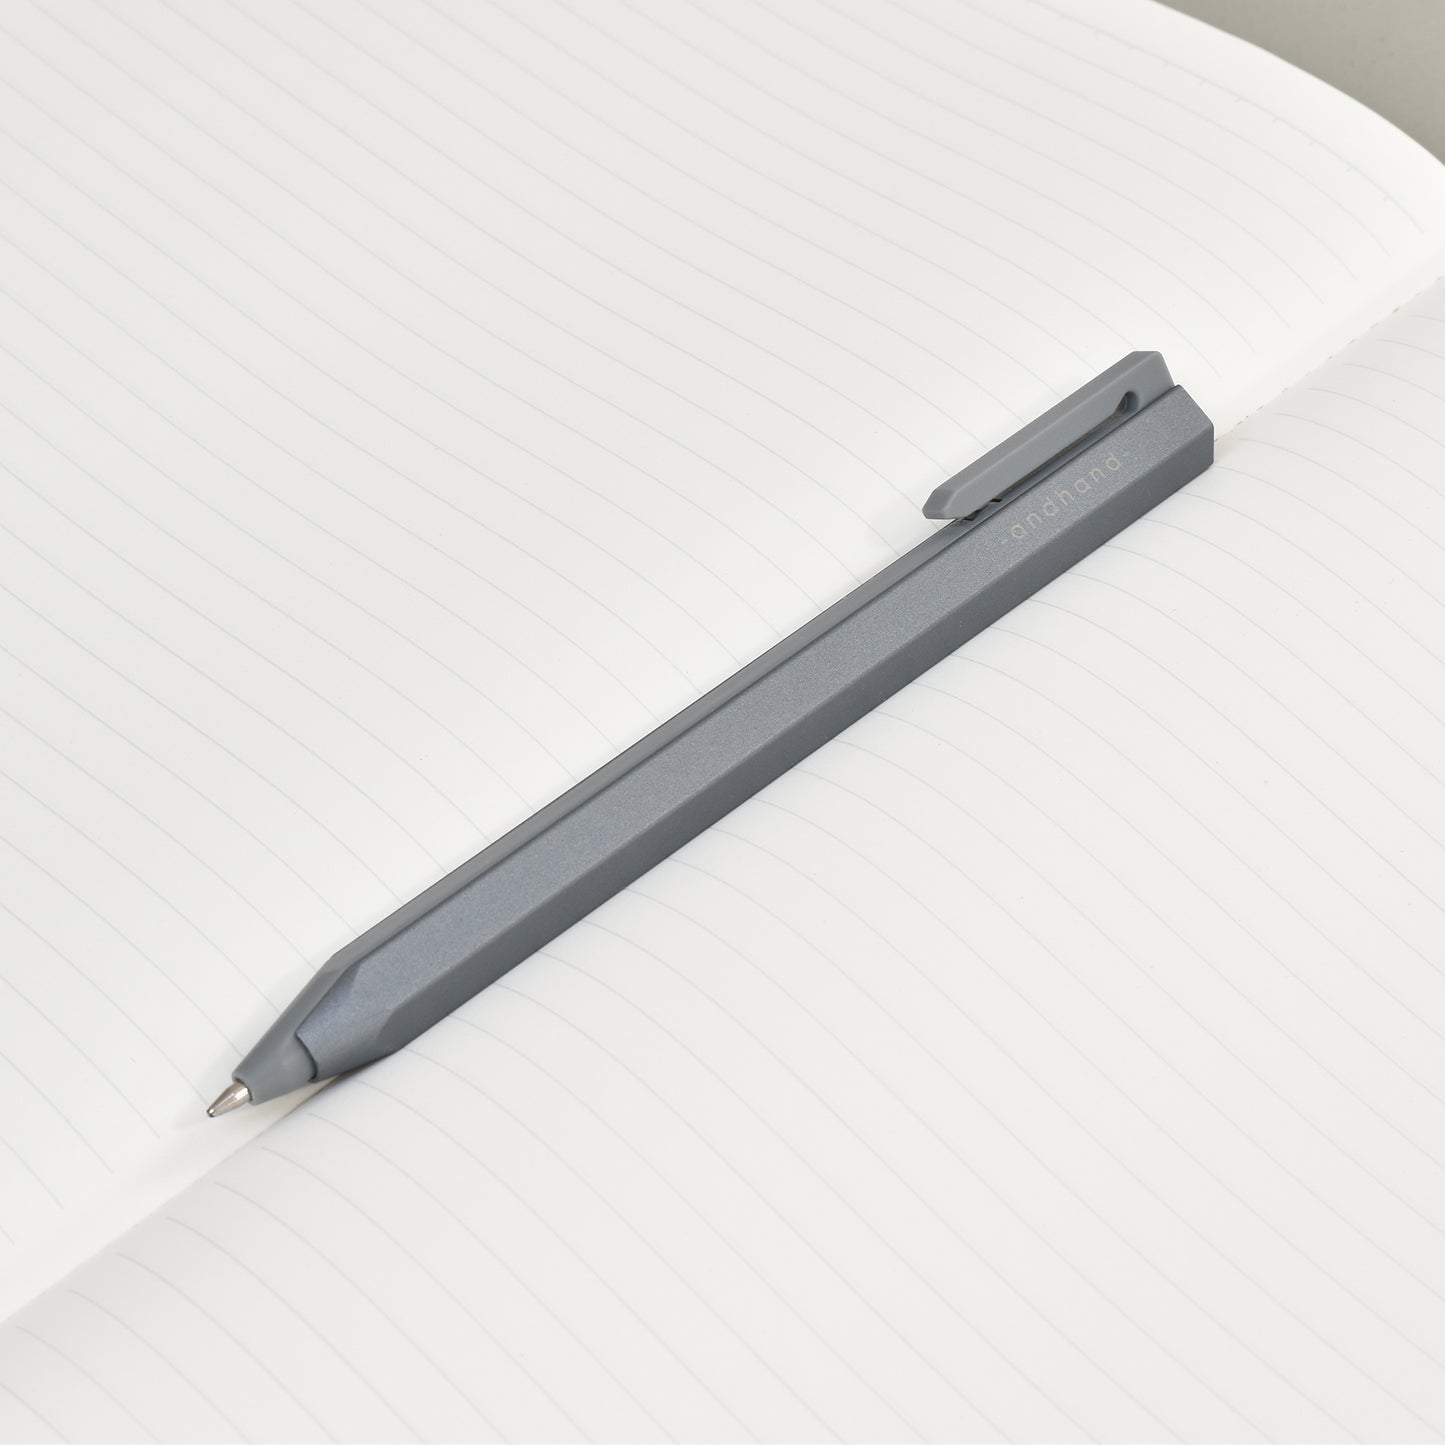 Core retractable pen is elegantly minimal in design and has been crafted from a durable palette of materials. Unique retracting mechanism and stylish slate grey finish.